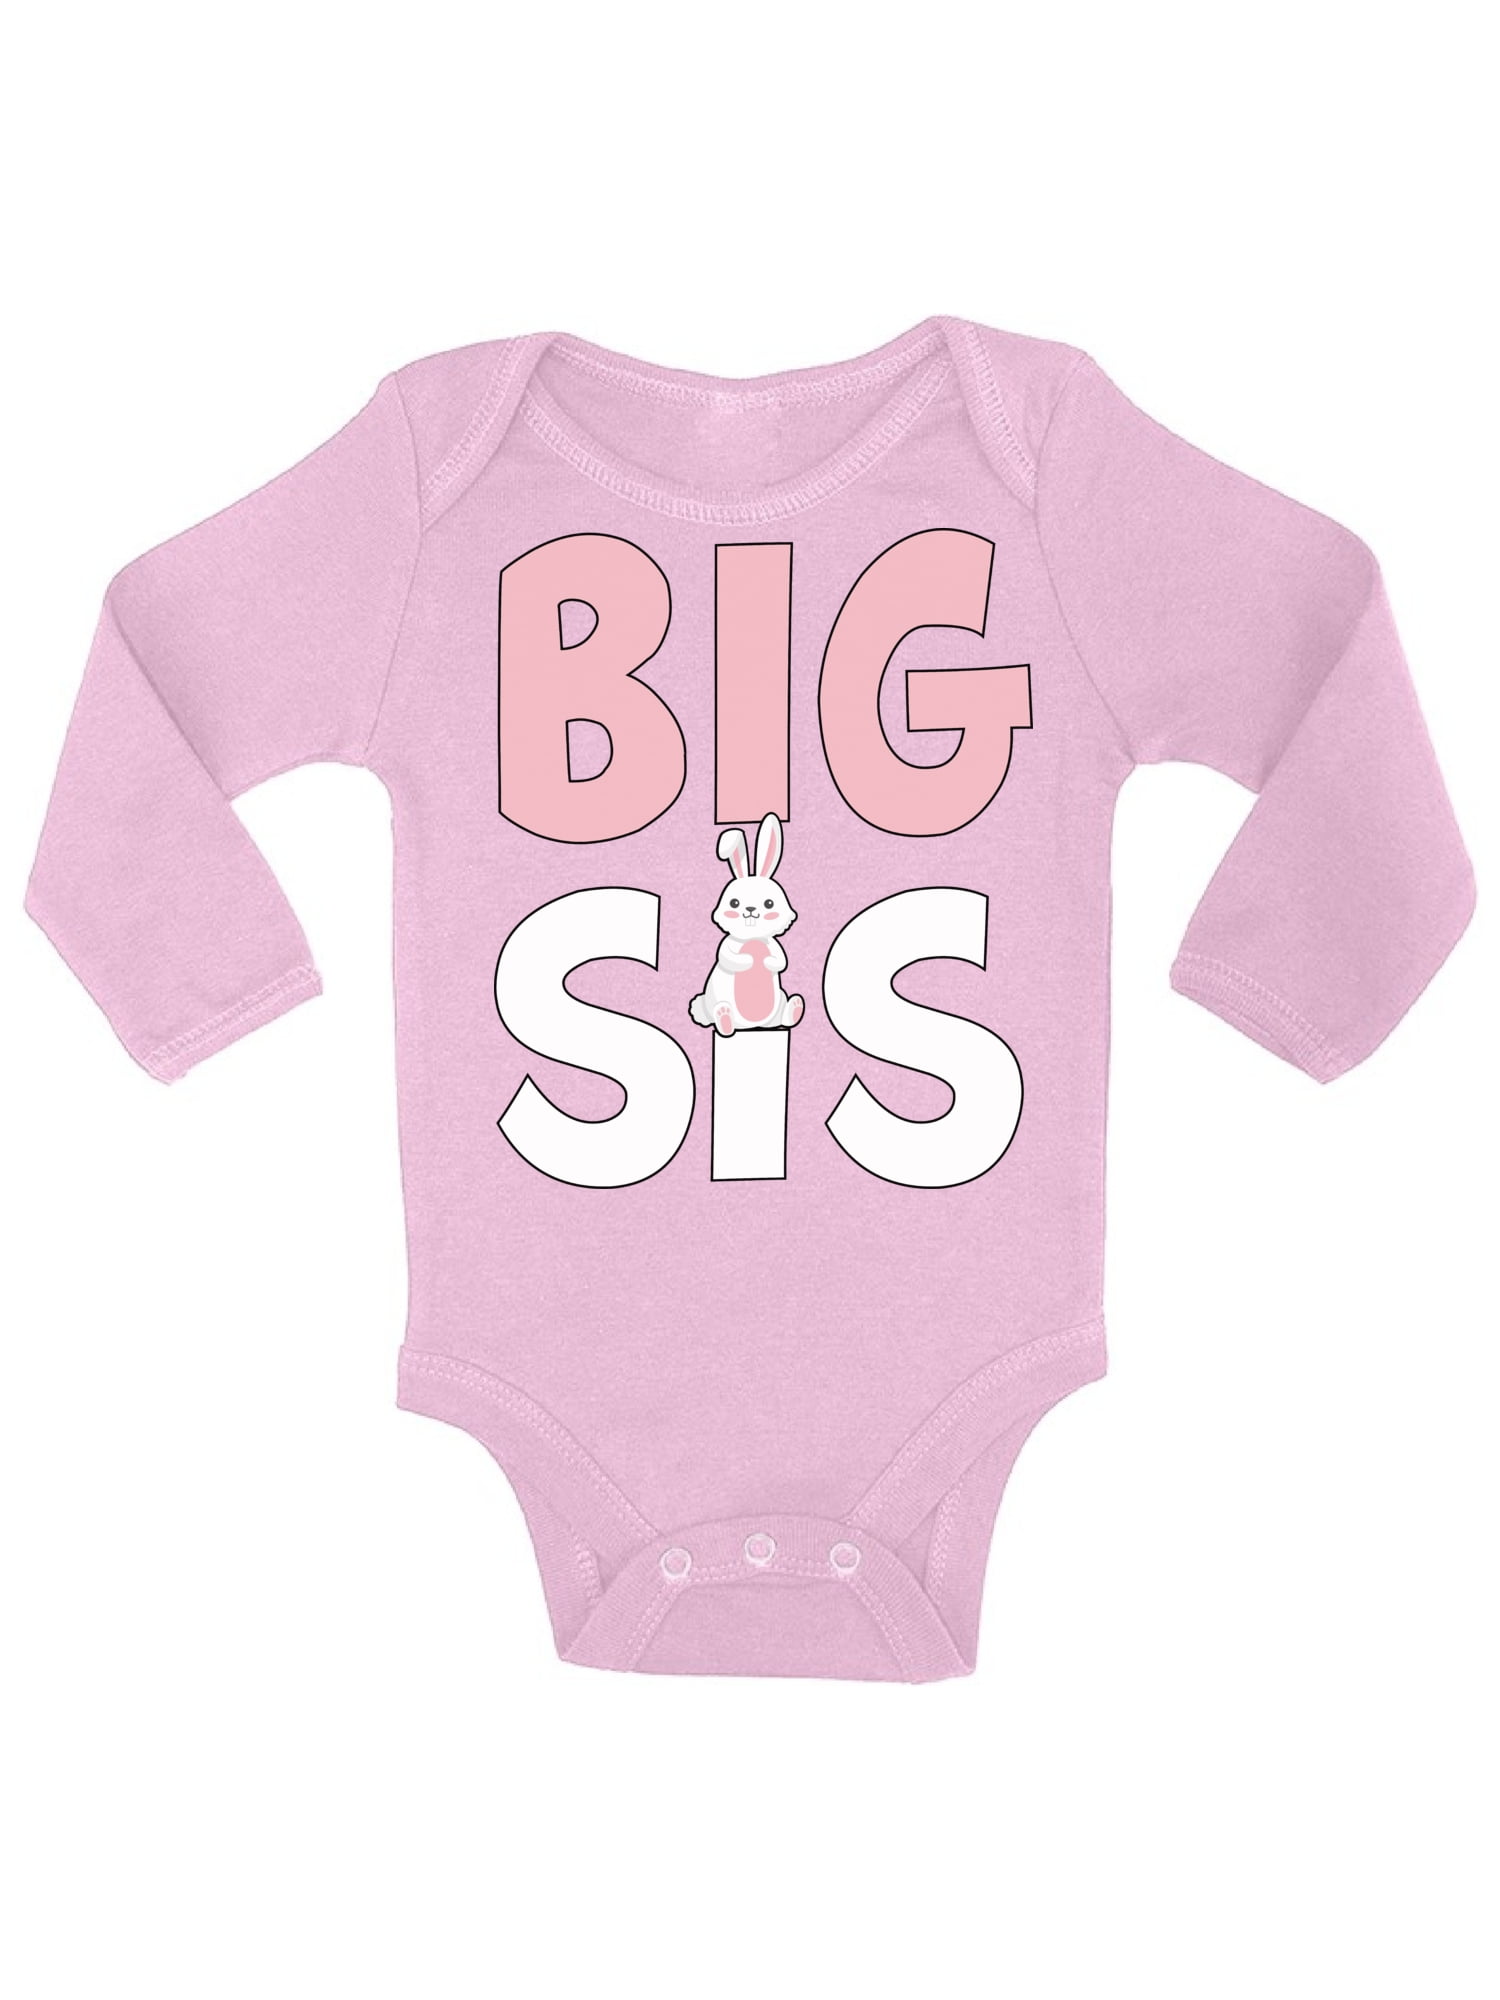 Awkward Styles Baby Announcement Baby Romper Bunny Bodysuit for Girls ...